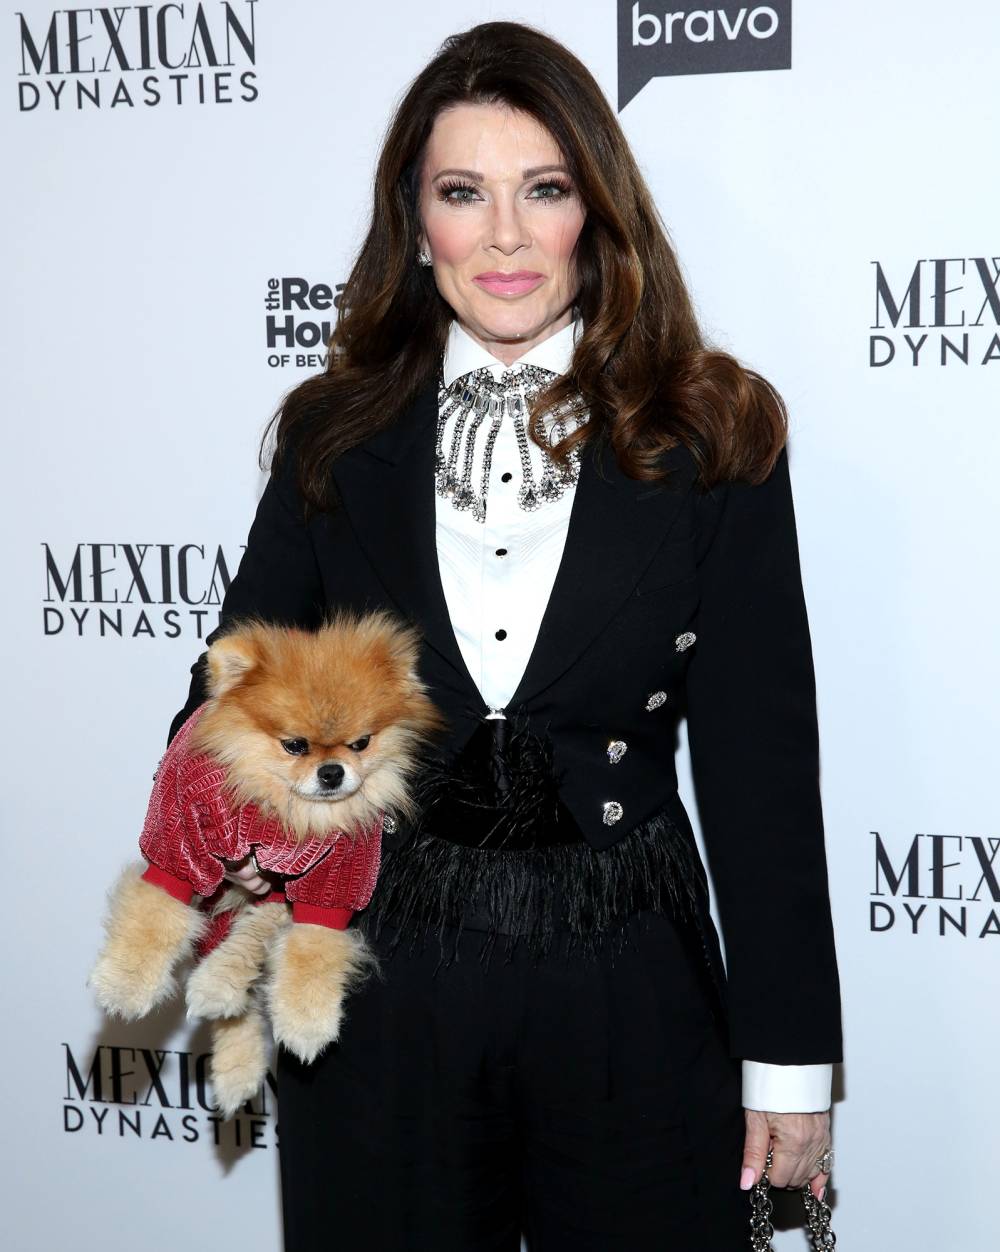 Lisa Vanderpump Bolts From ‘Real Housewives of Beverly Hills’ Season 9 Premiere Before Cast Arrives